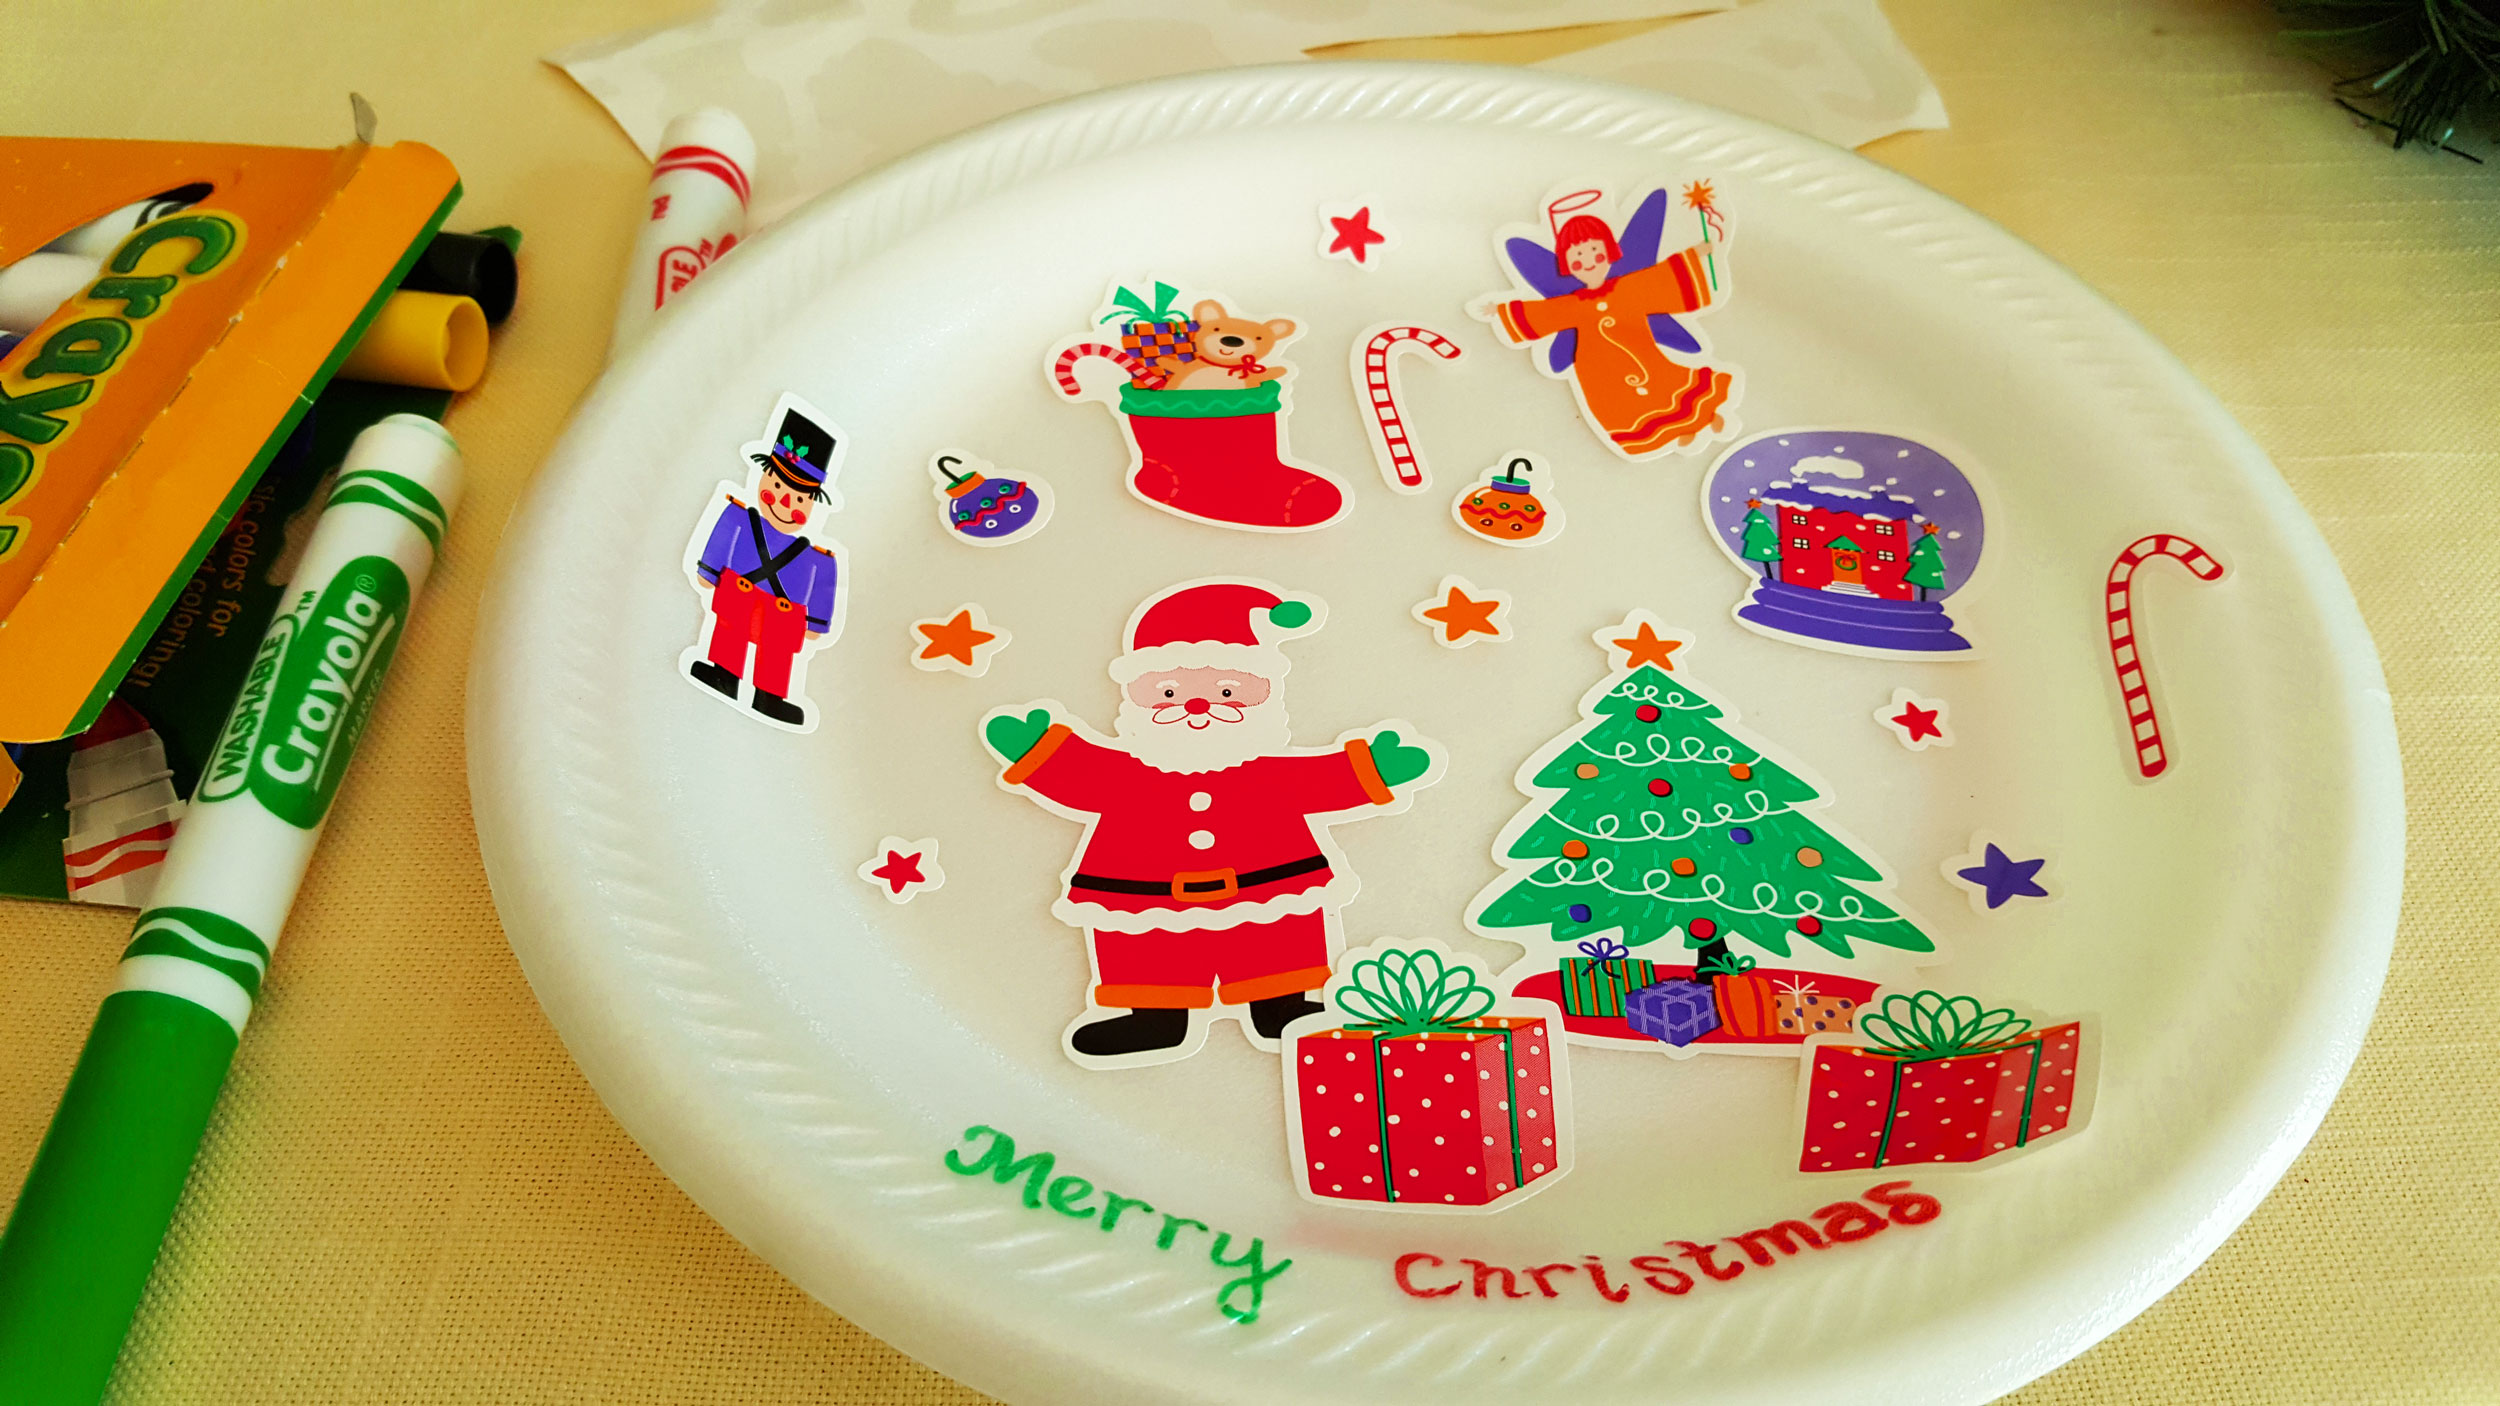 Step 1 of the DIY Holiday Wreath is to optionally color in the plates, draw pictures of Santa and other holiday figures on the plates, or use stickers to decorate the plates. | OrnamentShop.com